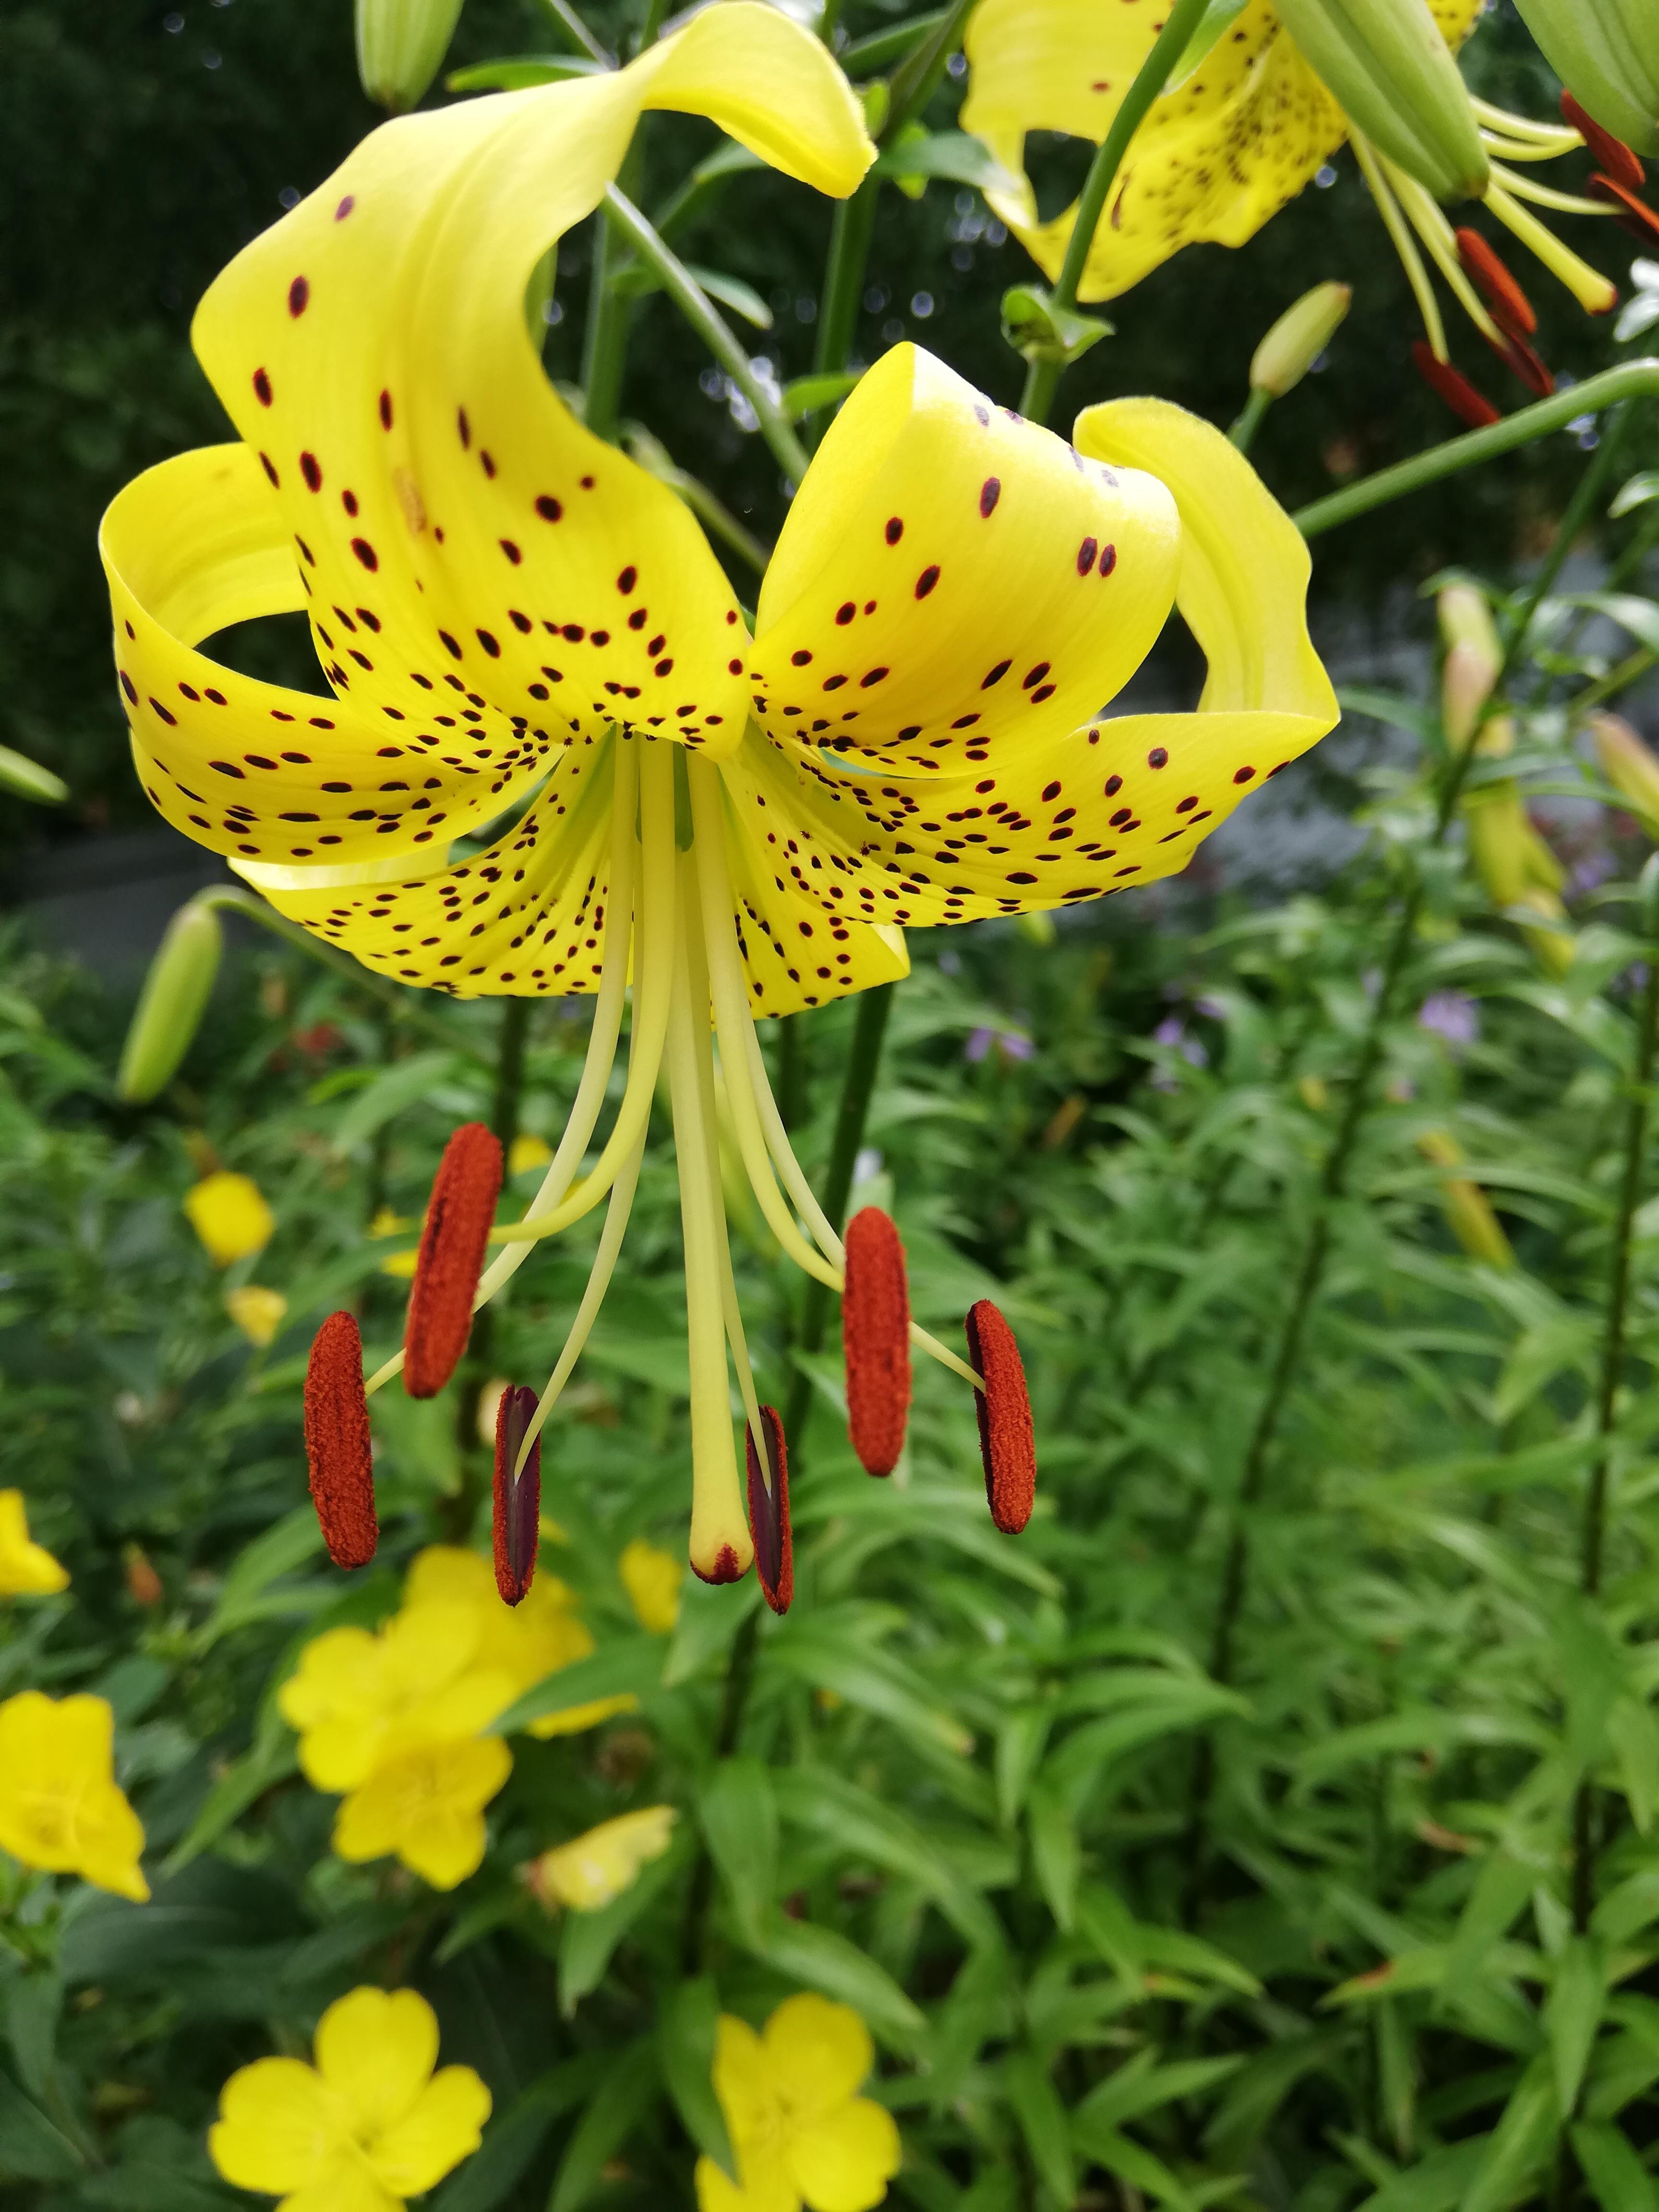 Lilies Asiatic Tiger 'Yellow Tiger' - Outdoor Lilies (Shipping begins Jan. 2021) from Leo Berbee Bulb Company